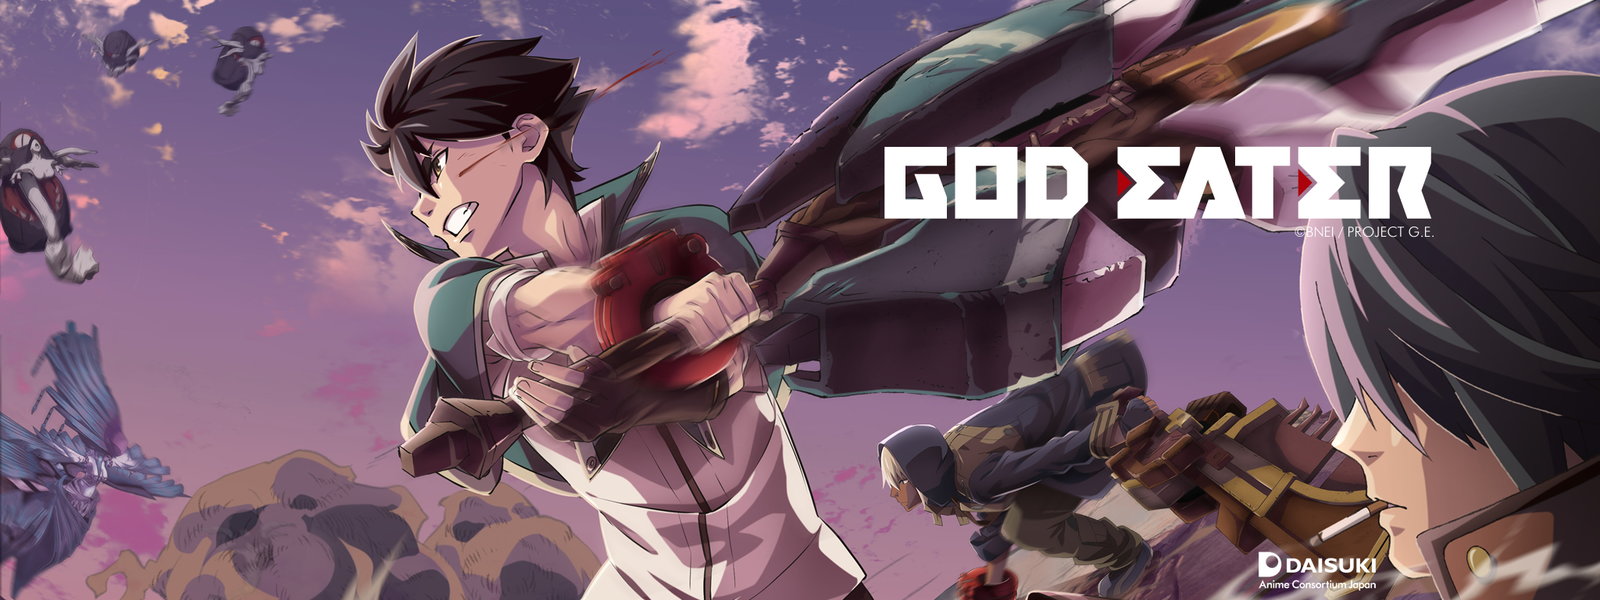 Amazon.com: God Eater Complete Collection BLU-RAY [2021] : Movies & TV